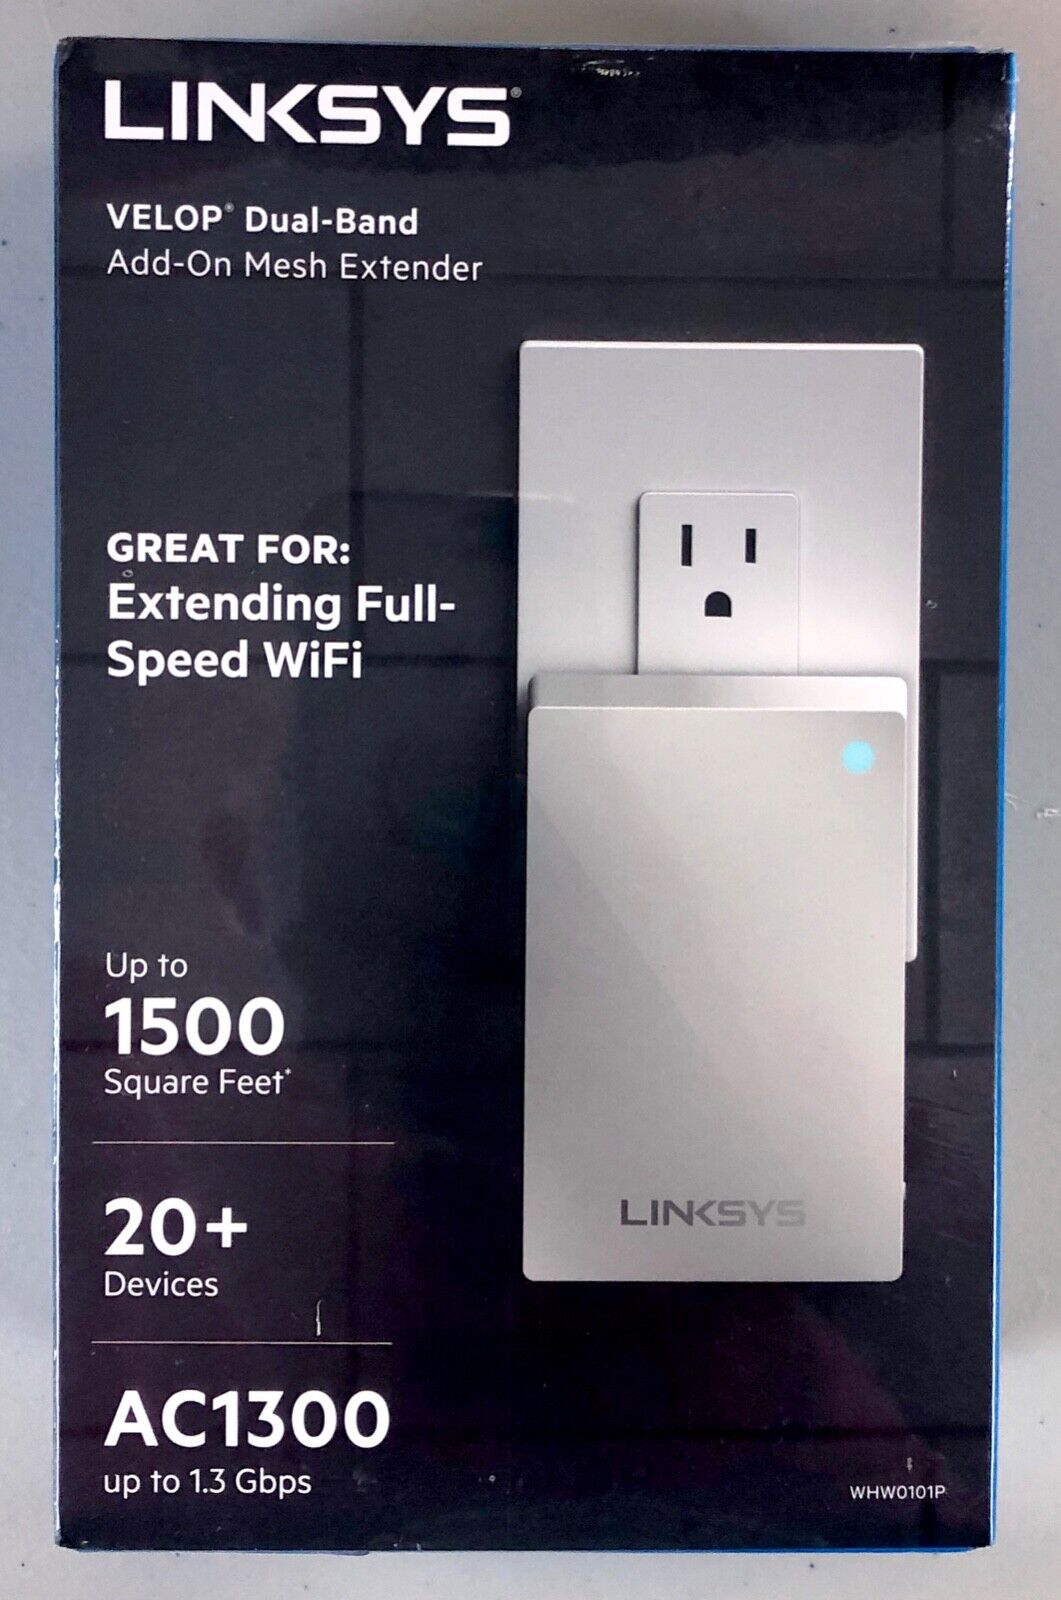 Linksys Velop Dial Band Add-On Mesh Extender, Model WHW010P